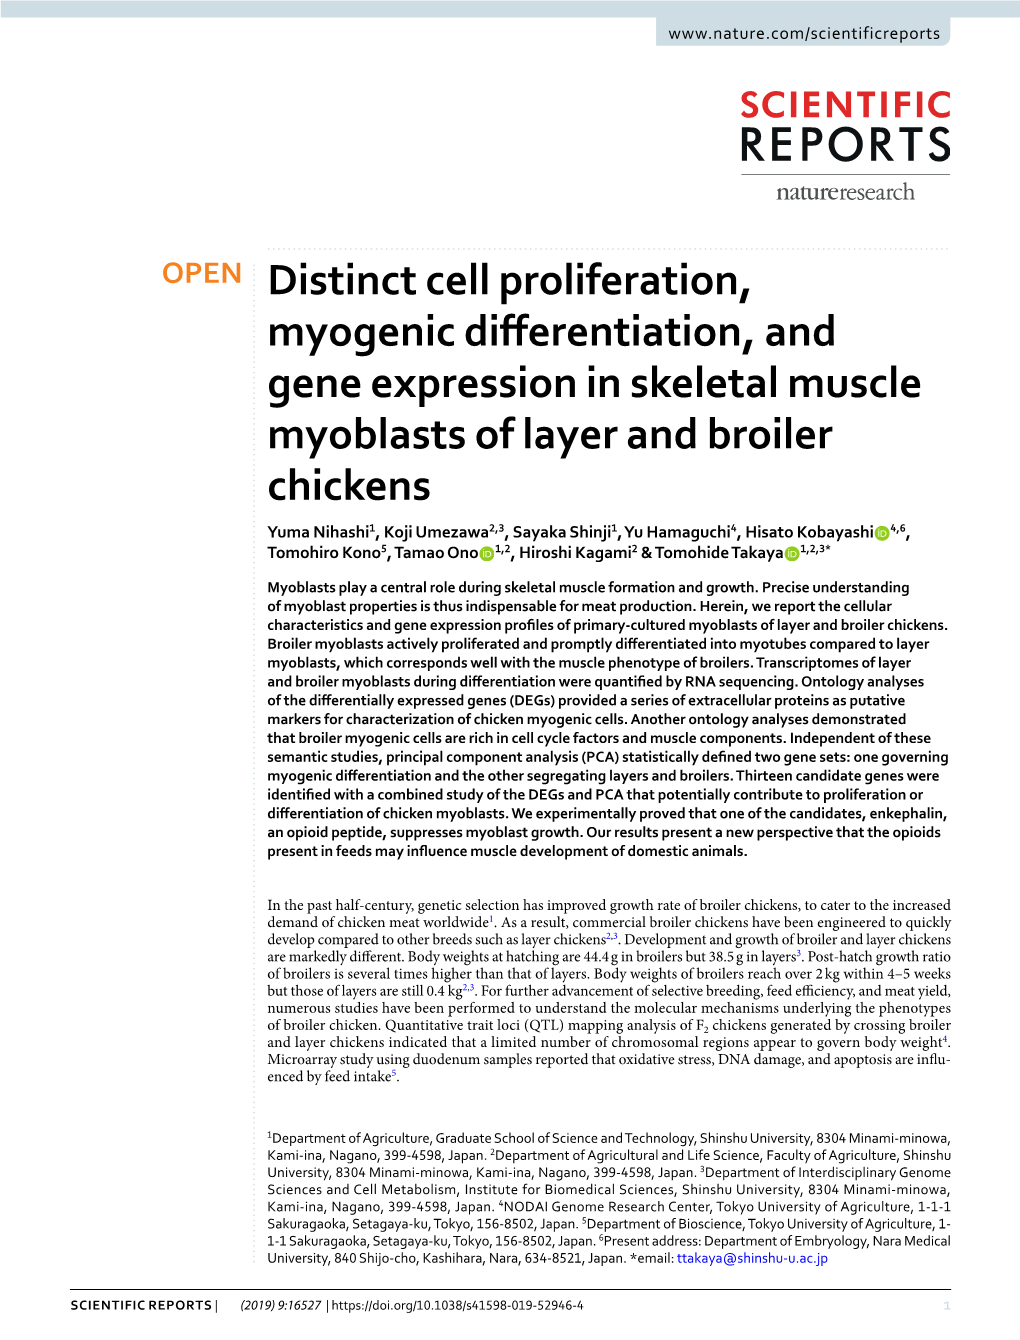 Distinct Cell Proliferation, Myogenic Differentiation, and Gene Expression